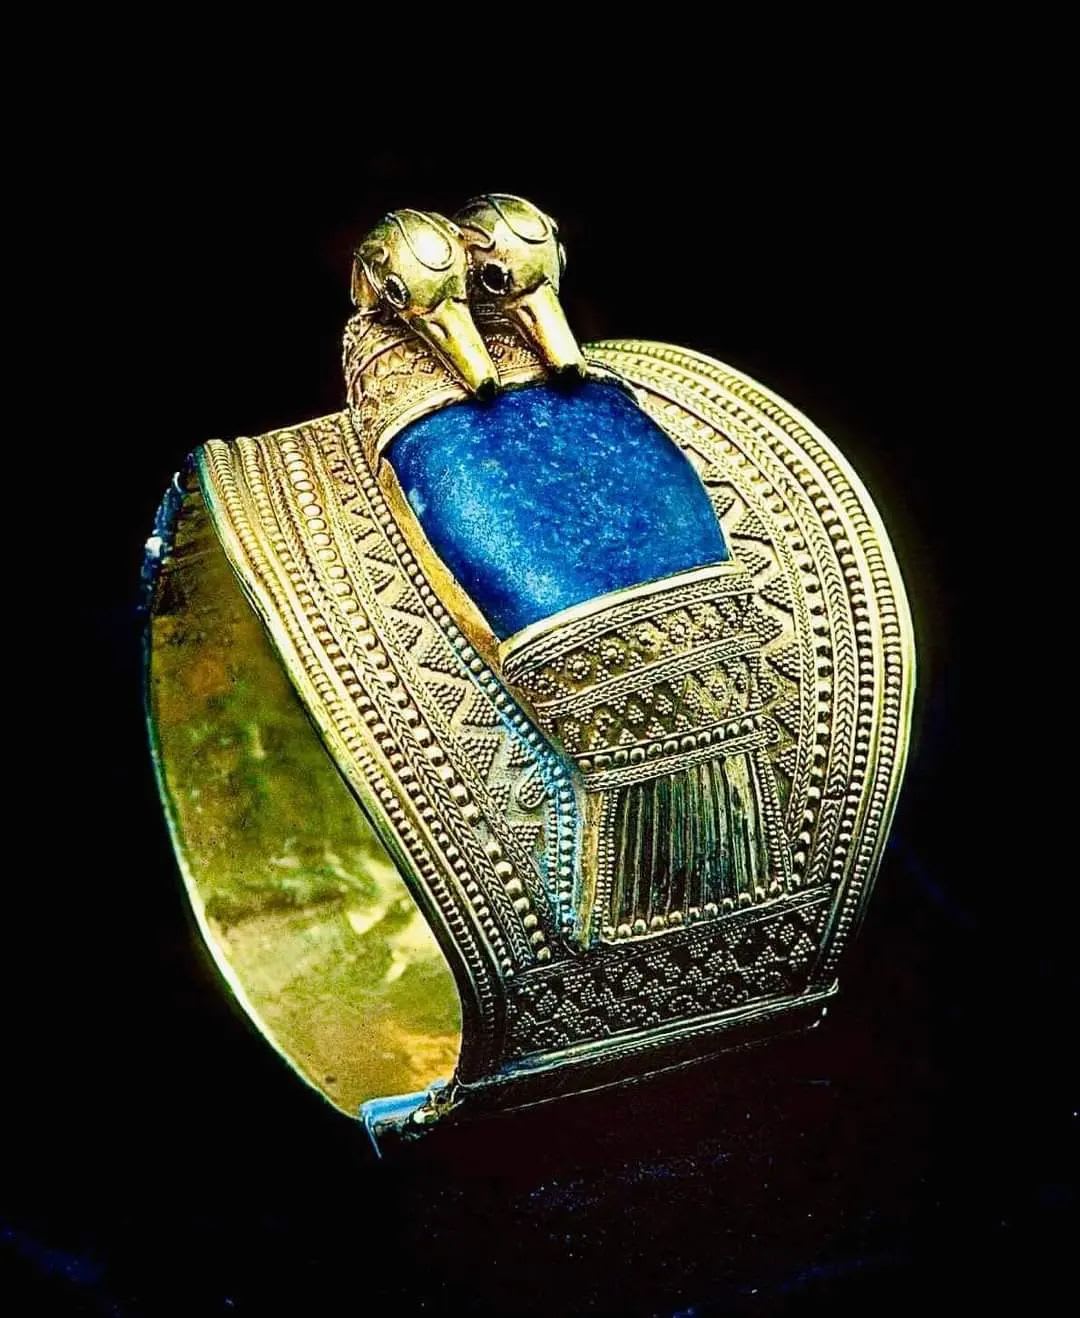 A gold bracelet showing two ducks, from the 19th dyansty of Egypt (c. 1279-1213 B.C.) that once belonged to King Ramesses II.